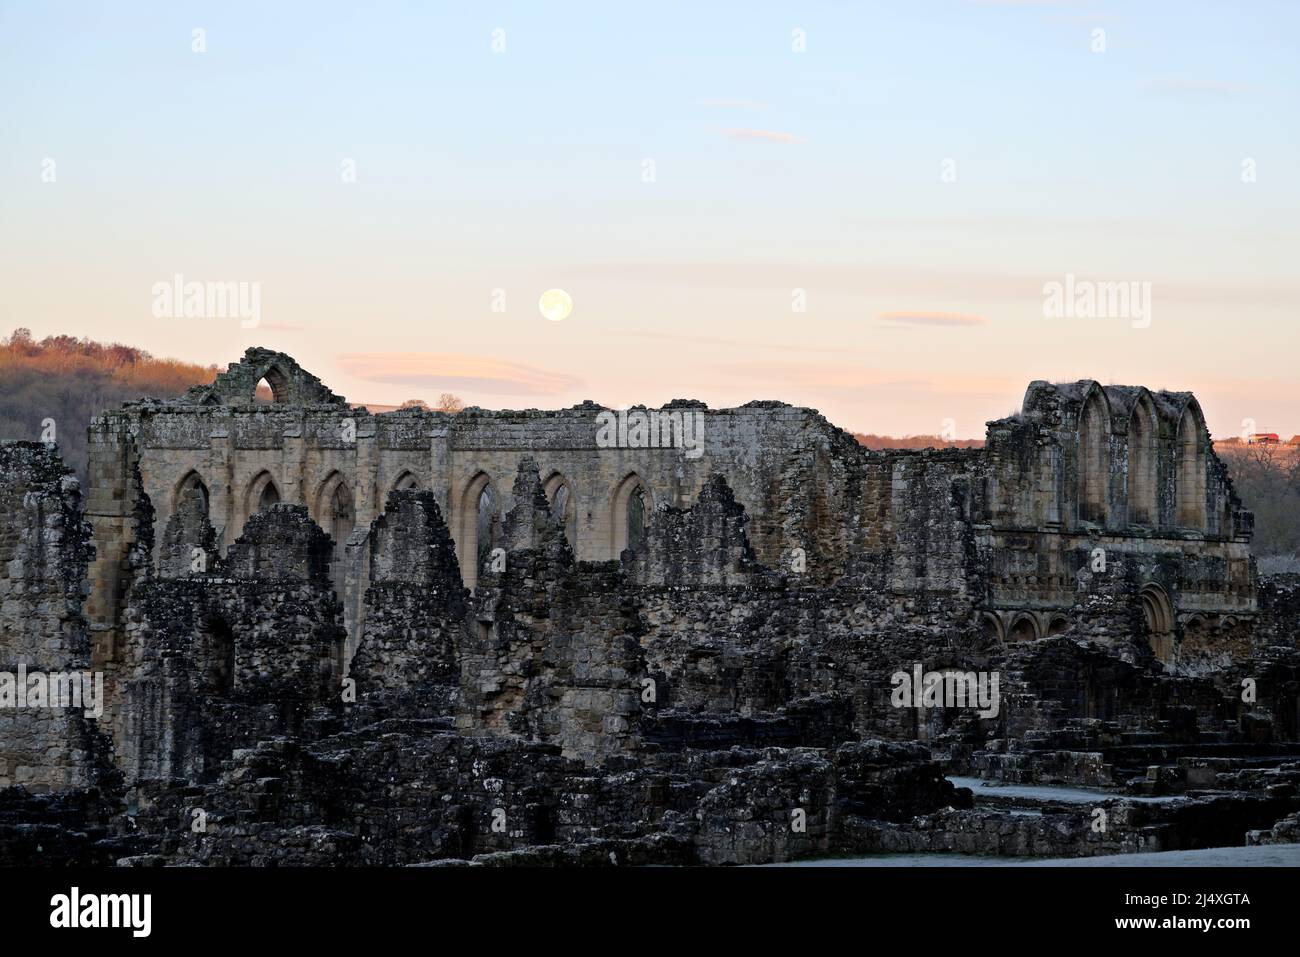 The wall of the warming house behind which is the refectory of ruined Rievaulx Cistercian Abbey at sunrise & after the moon has risen Stock Photo